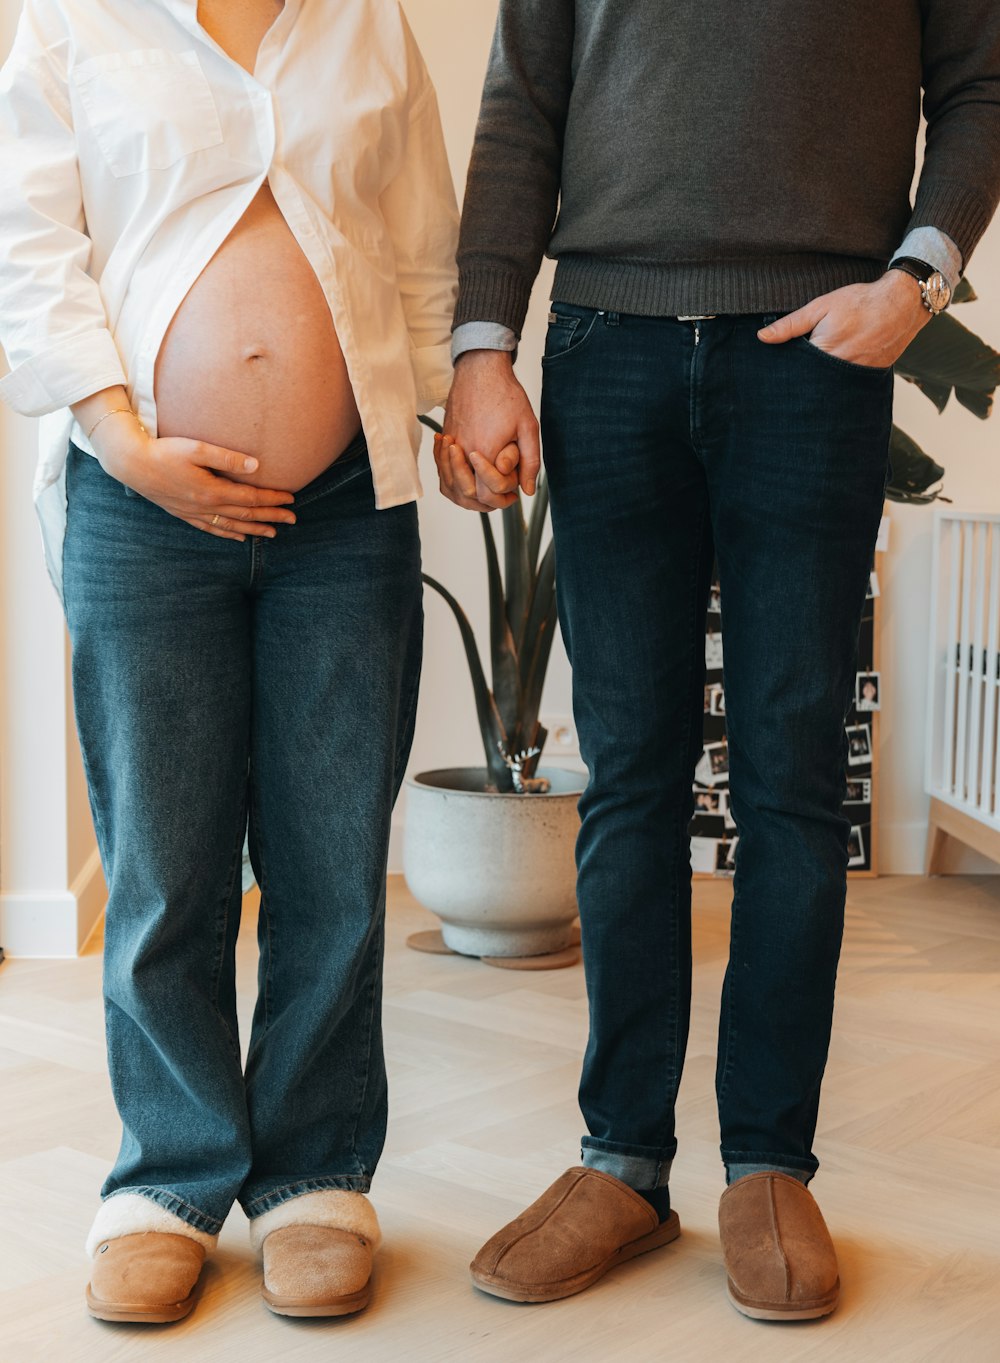 a pregnant woman standing next to a man